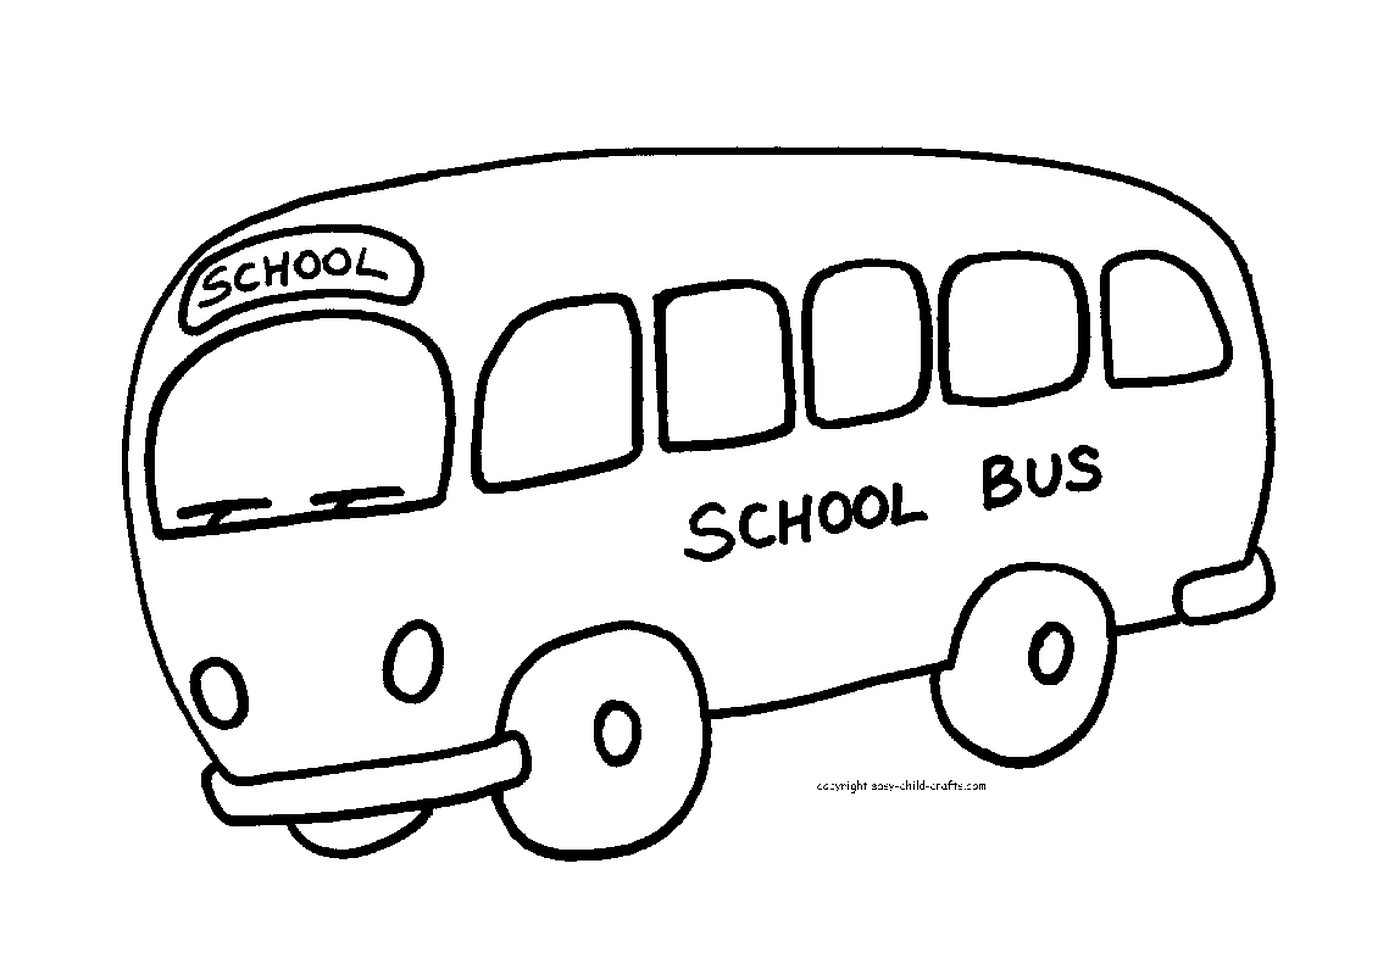  A school bus ready to welcome the students 